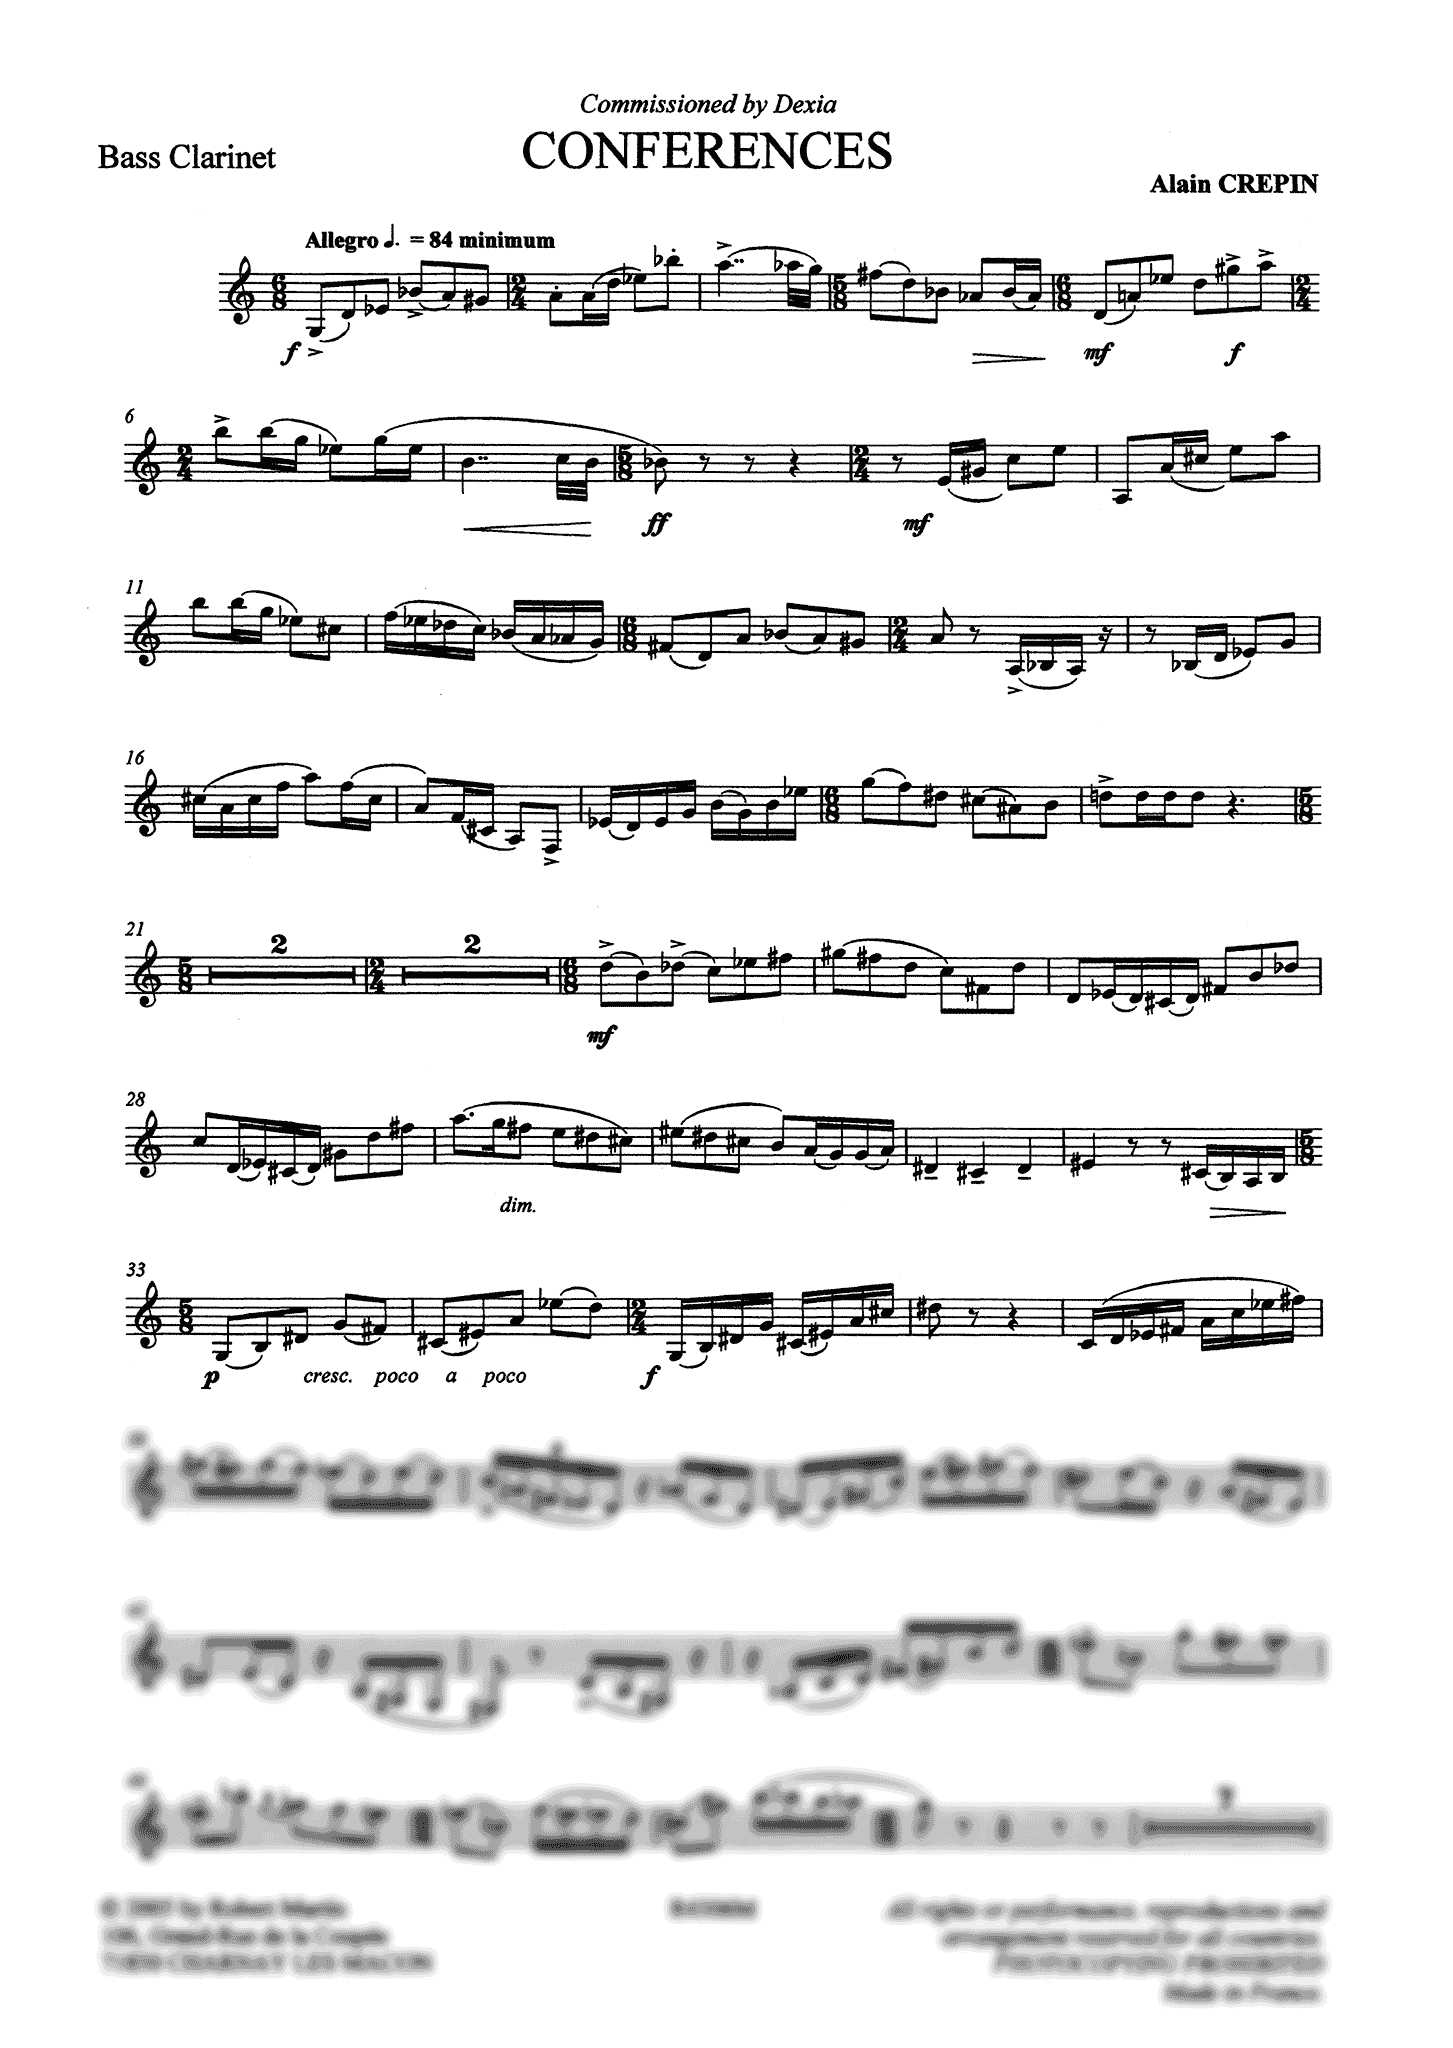 Crepin Conférences bass clarinet & piano solo part